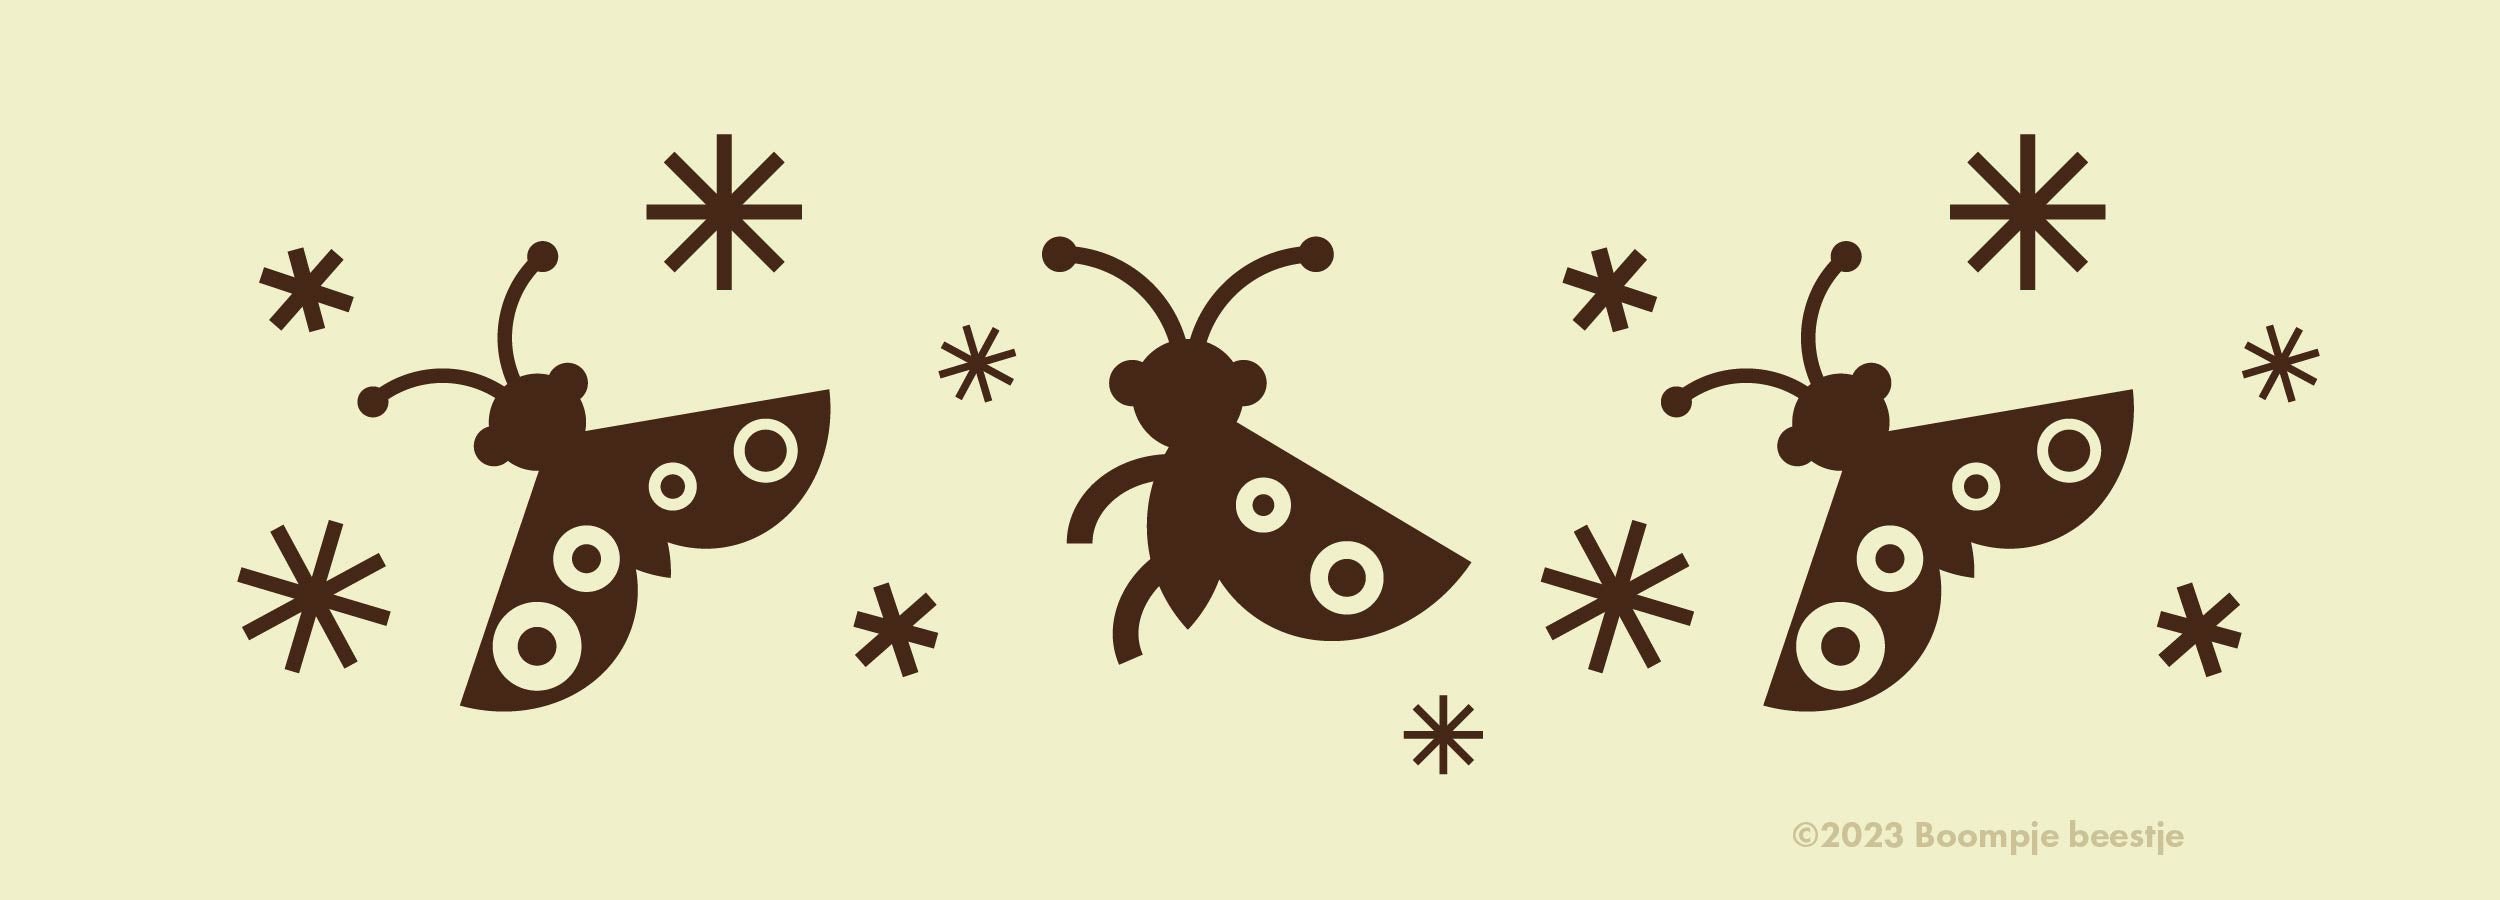 An illustration of three brown moths against a pale yellow background, with the copyright text '©2023 Boompje beestje' at the bottom.